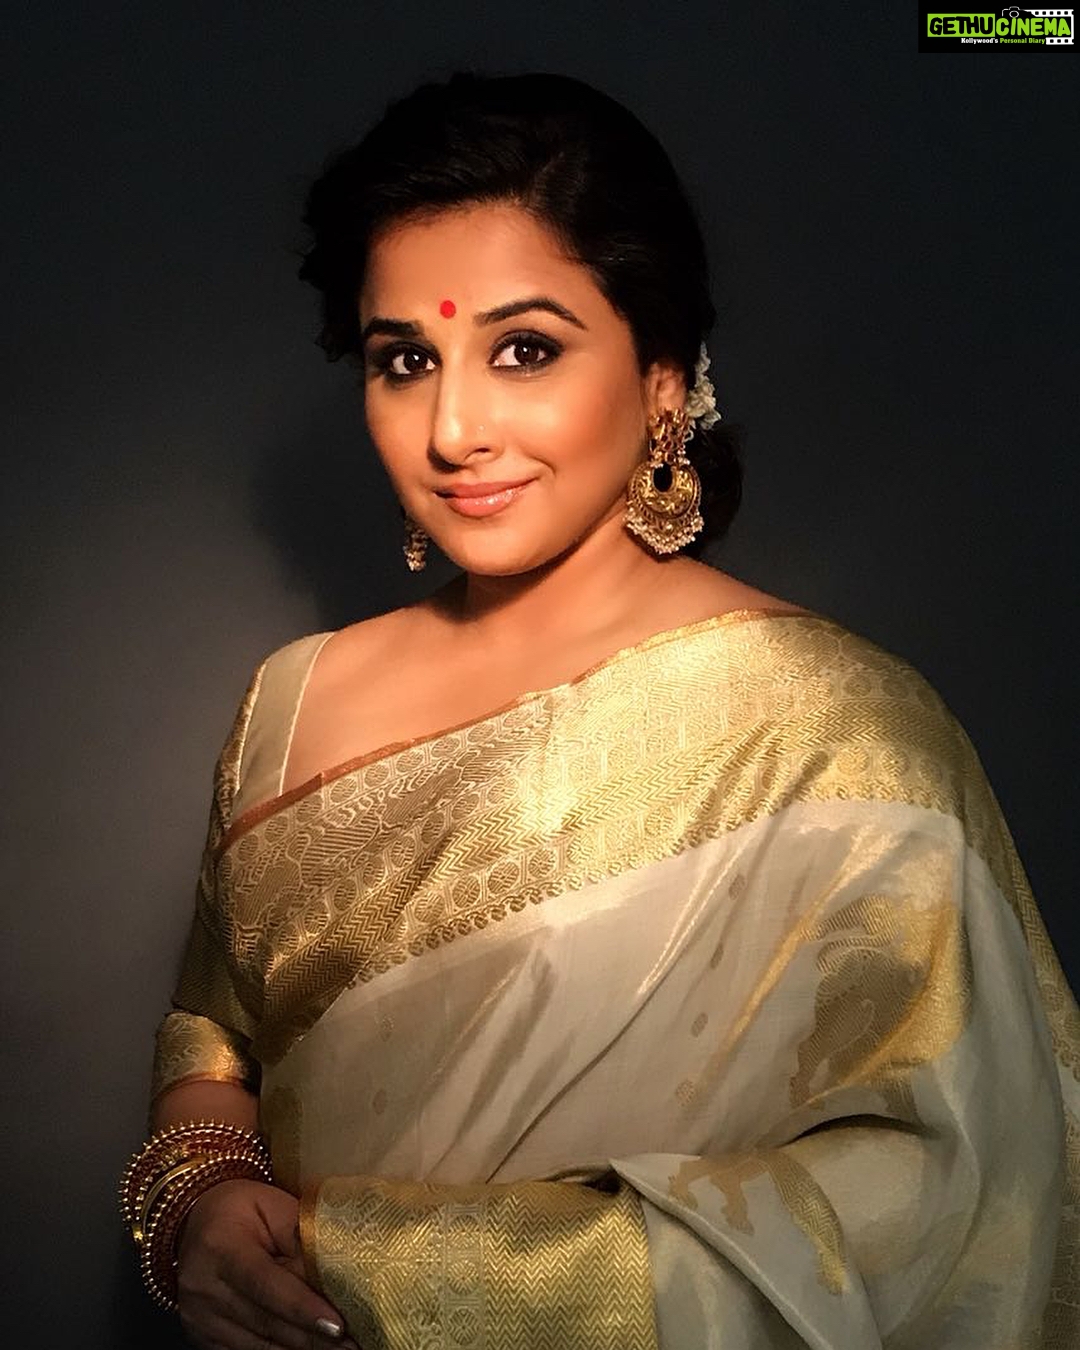 What kind of hairstyles and accessories will look good for a silk saree for  making the face look slimmer? - Quora